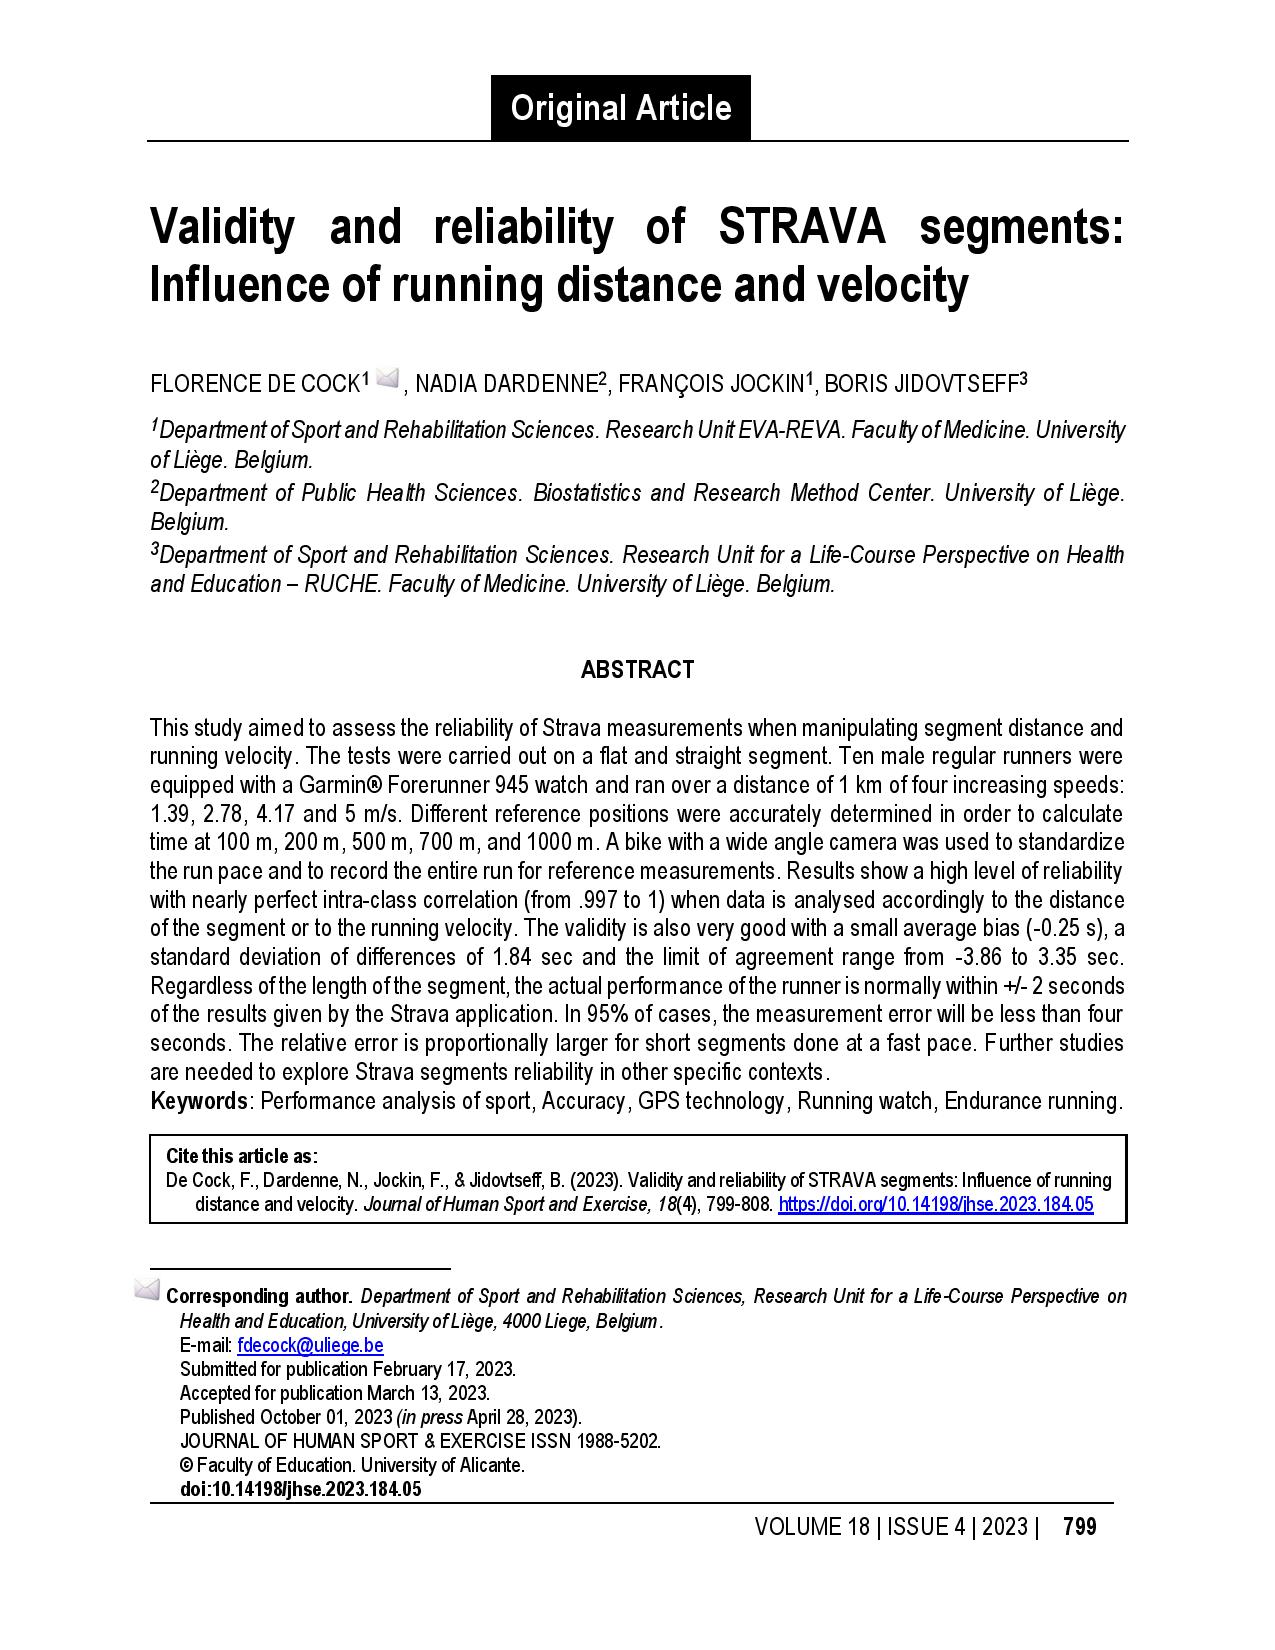 Validity and reliability of STRAVA segments: Influence of running distance and velocity